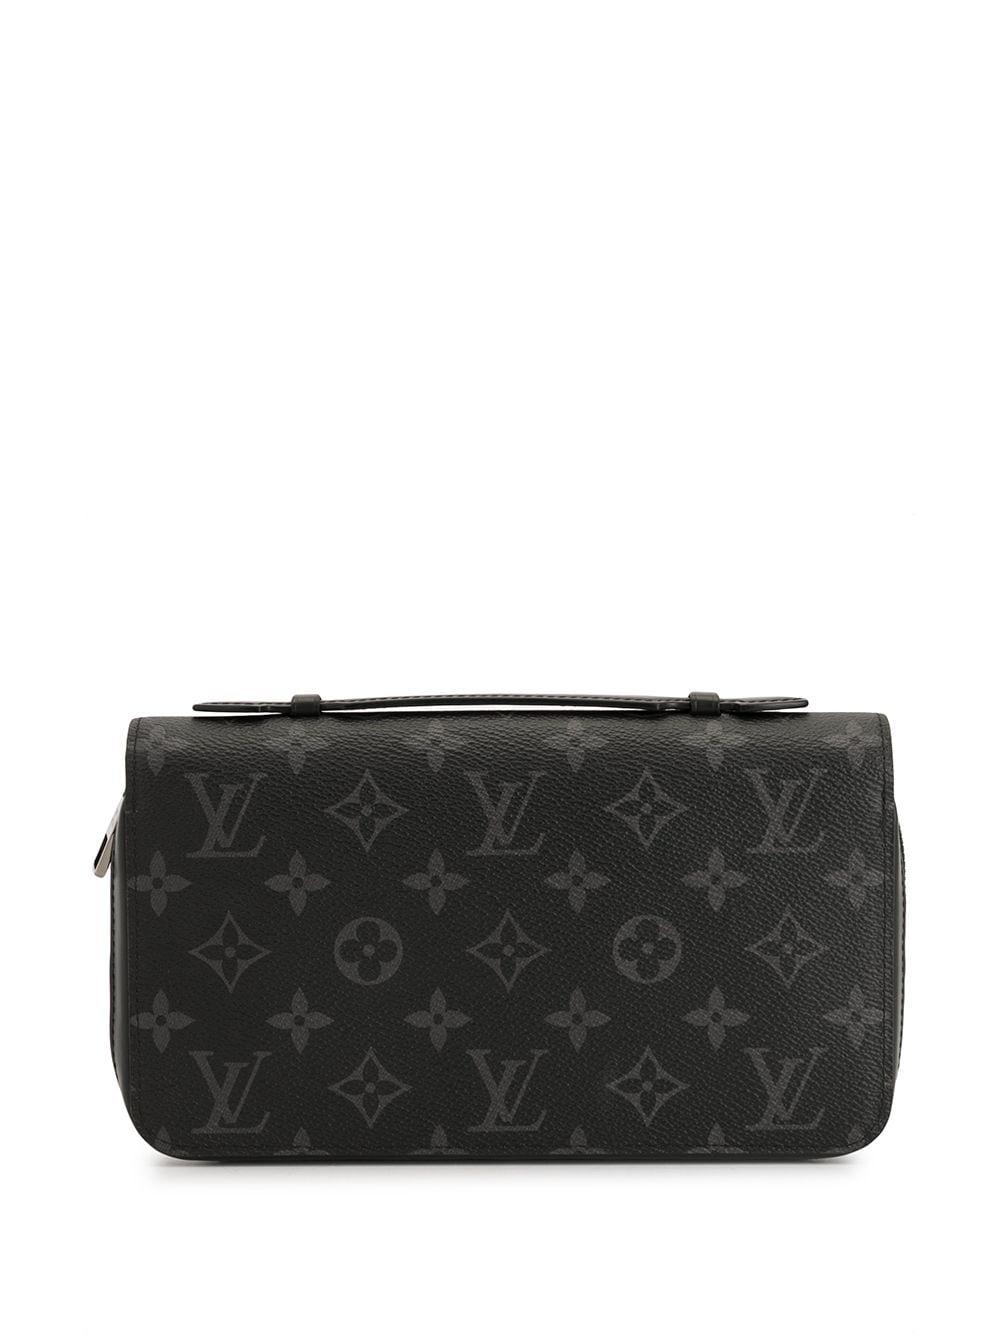 Louis Vuitton Leather Pre-owned Zippy Xl Zipped Wallet in Black - Lyst